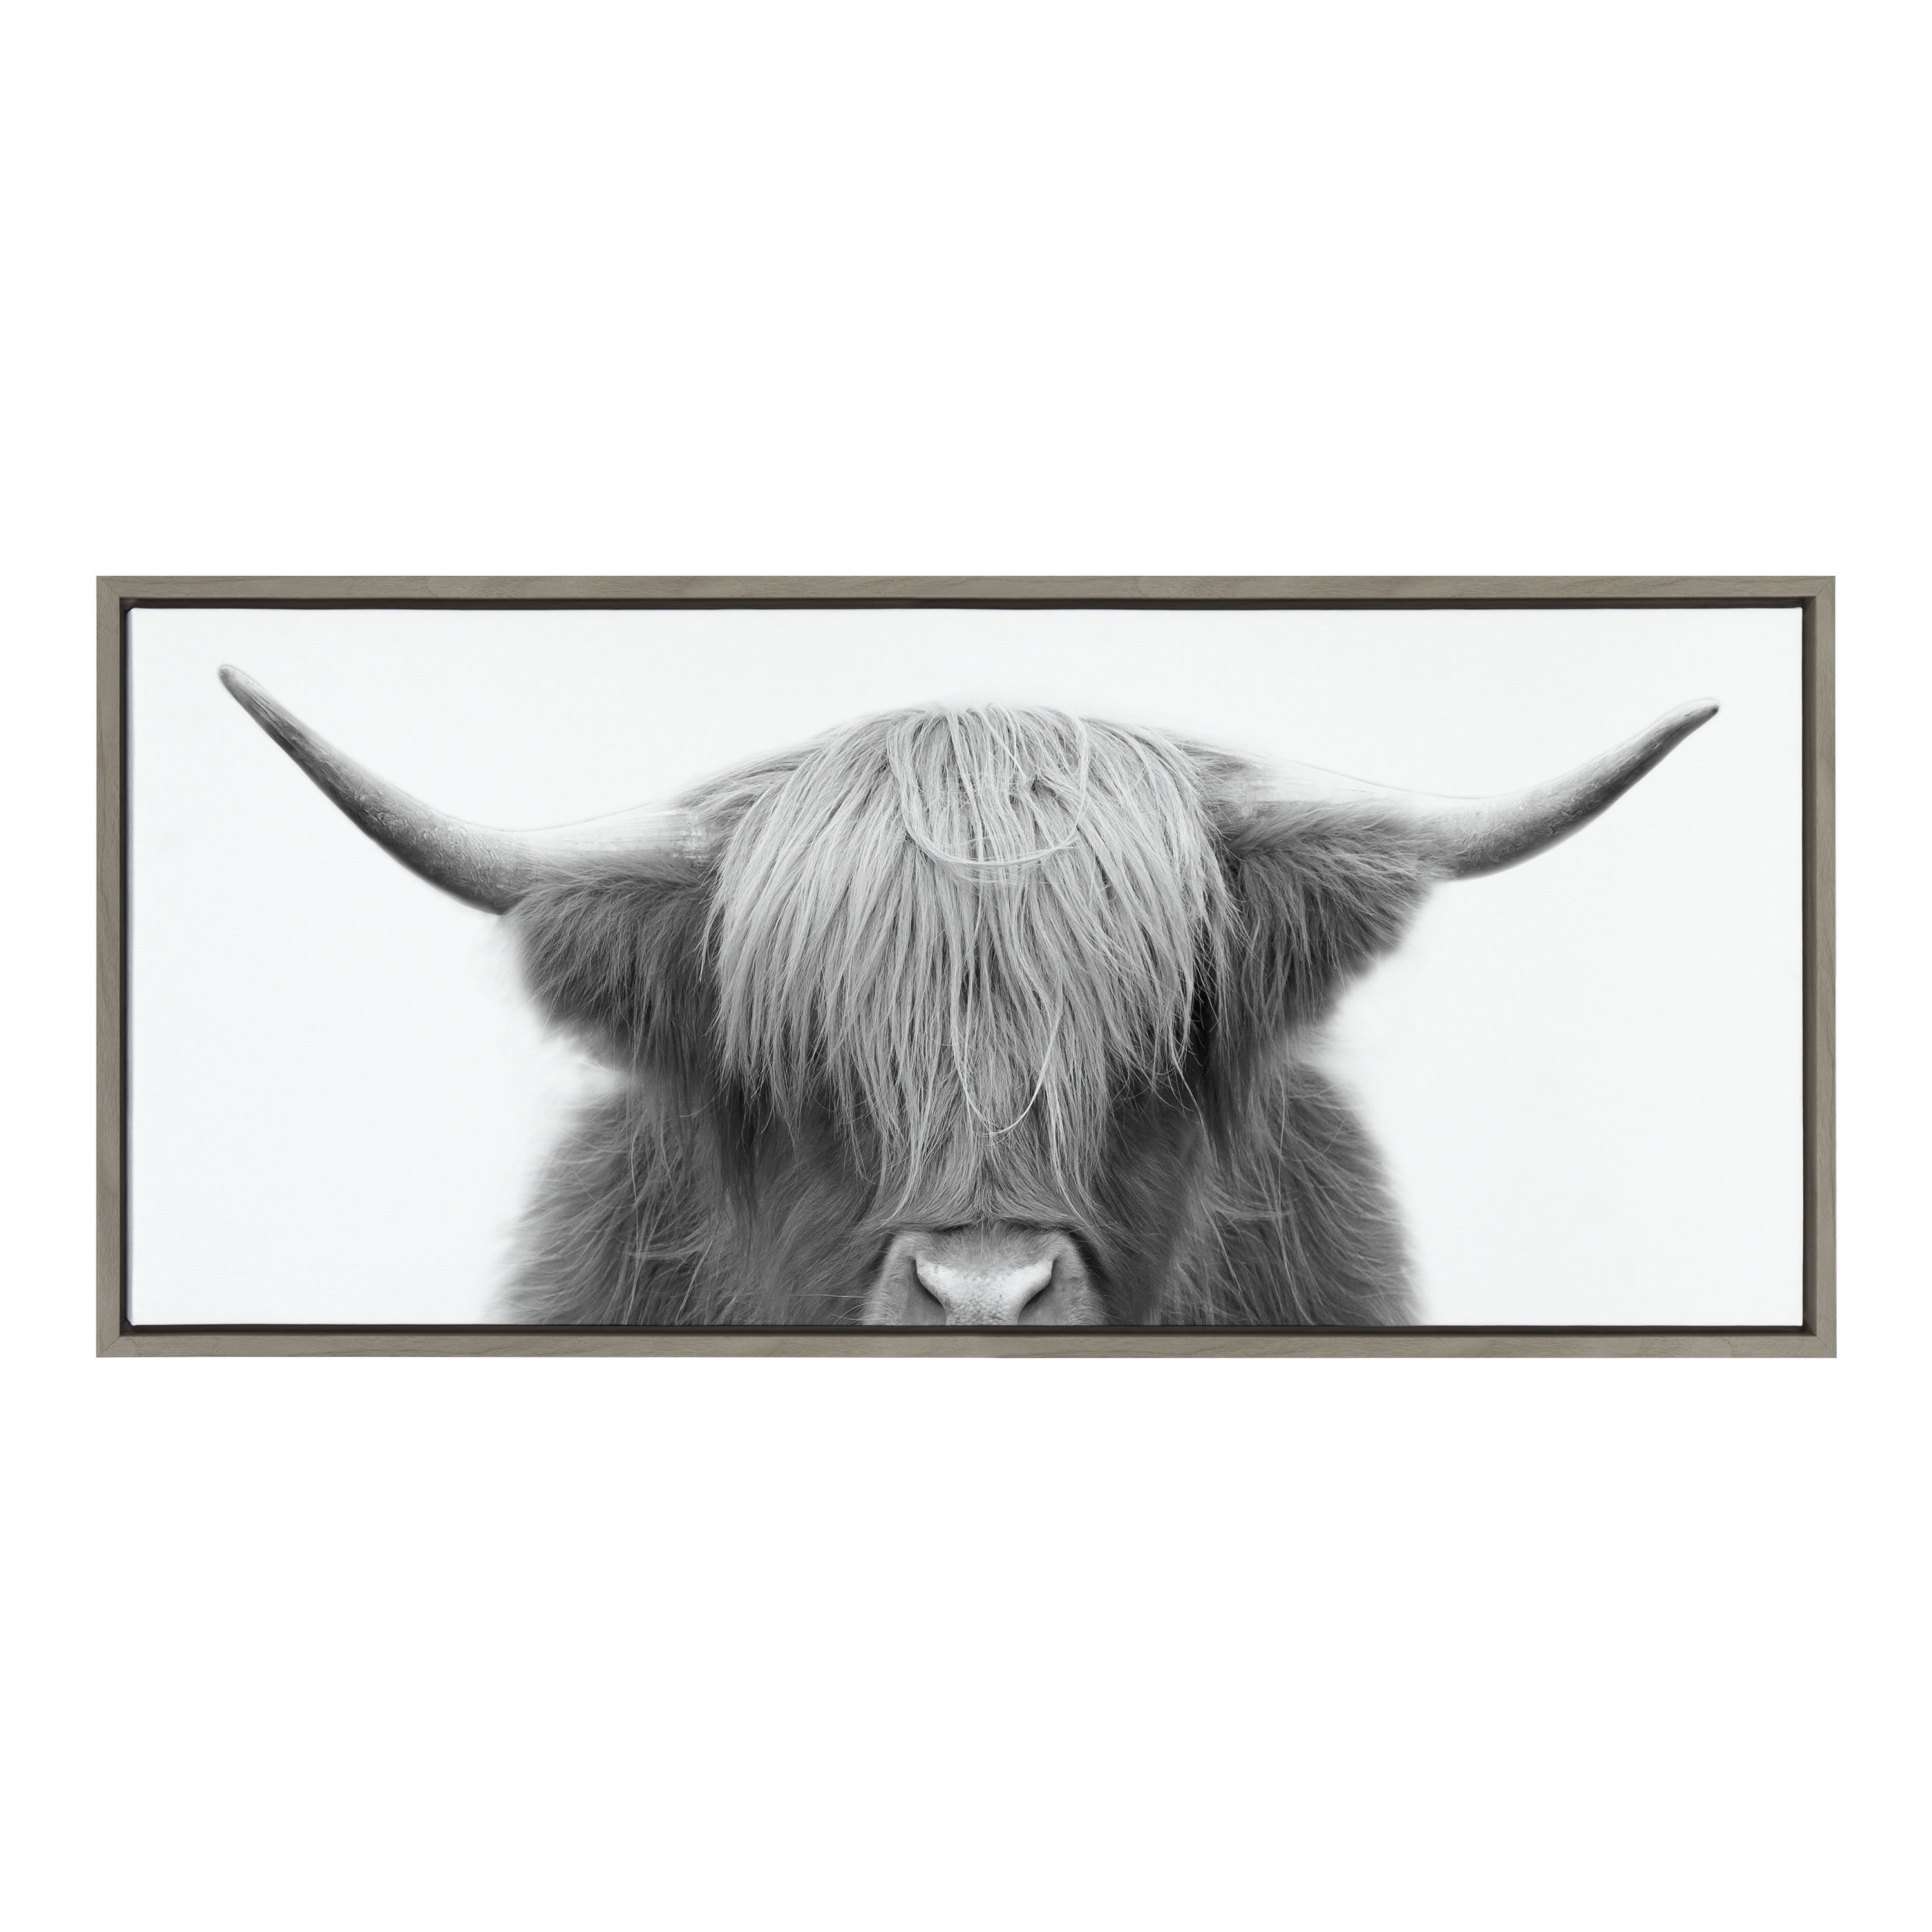 Rustic Wood Plank Cow Wall ArtCoastal Cottage Painted Black White 